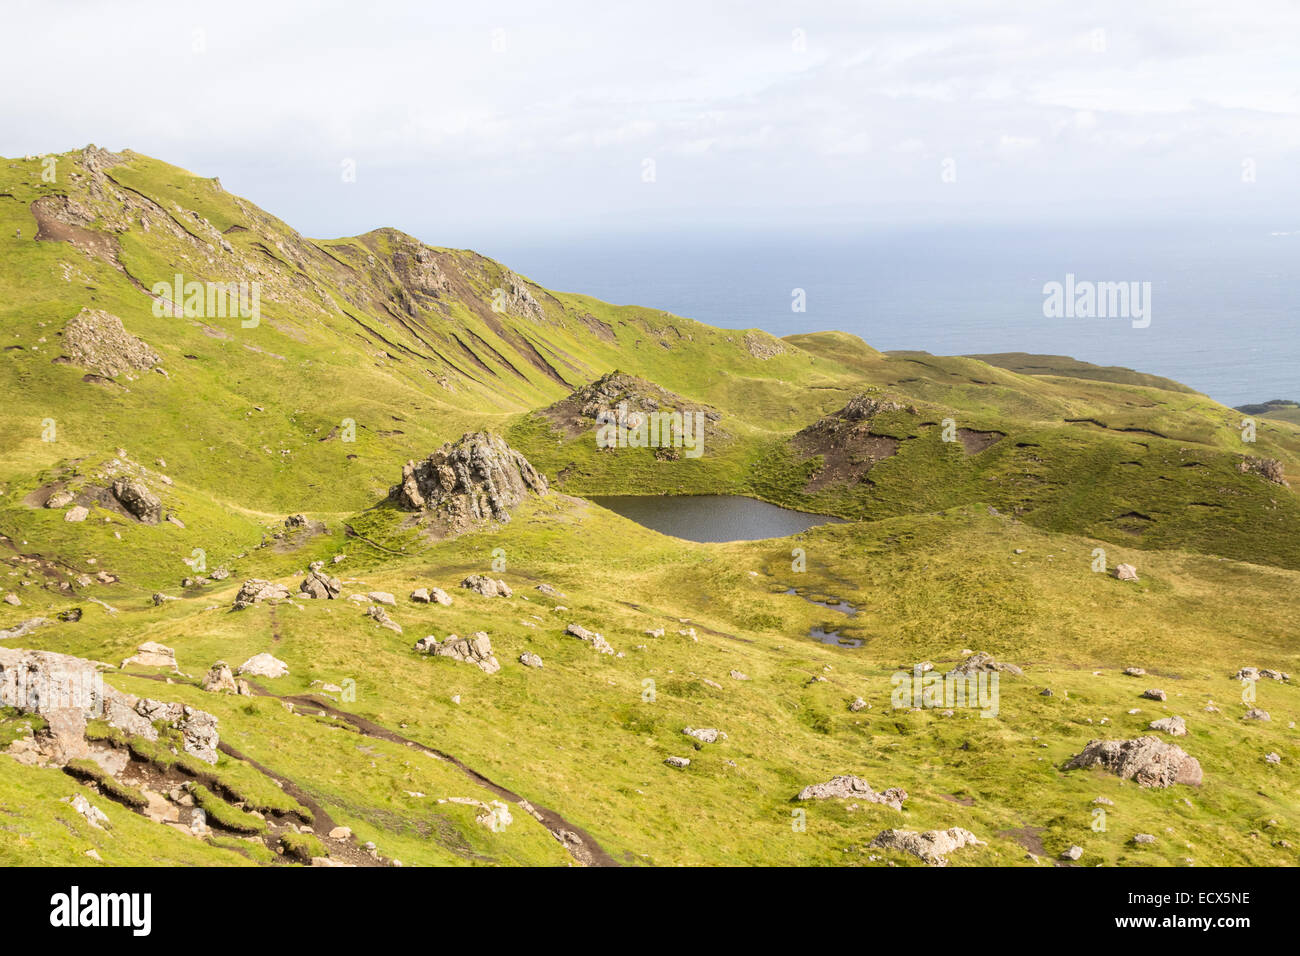 A scottisch mountain landscape on 'The Storr' on the isle of Skye Stock Photo